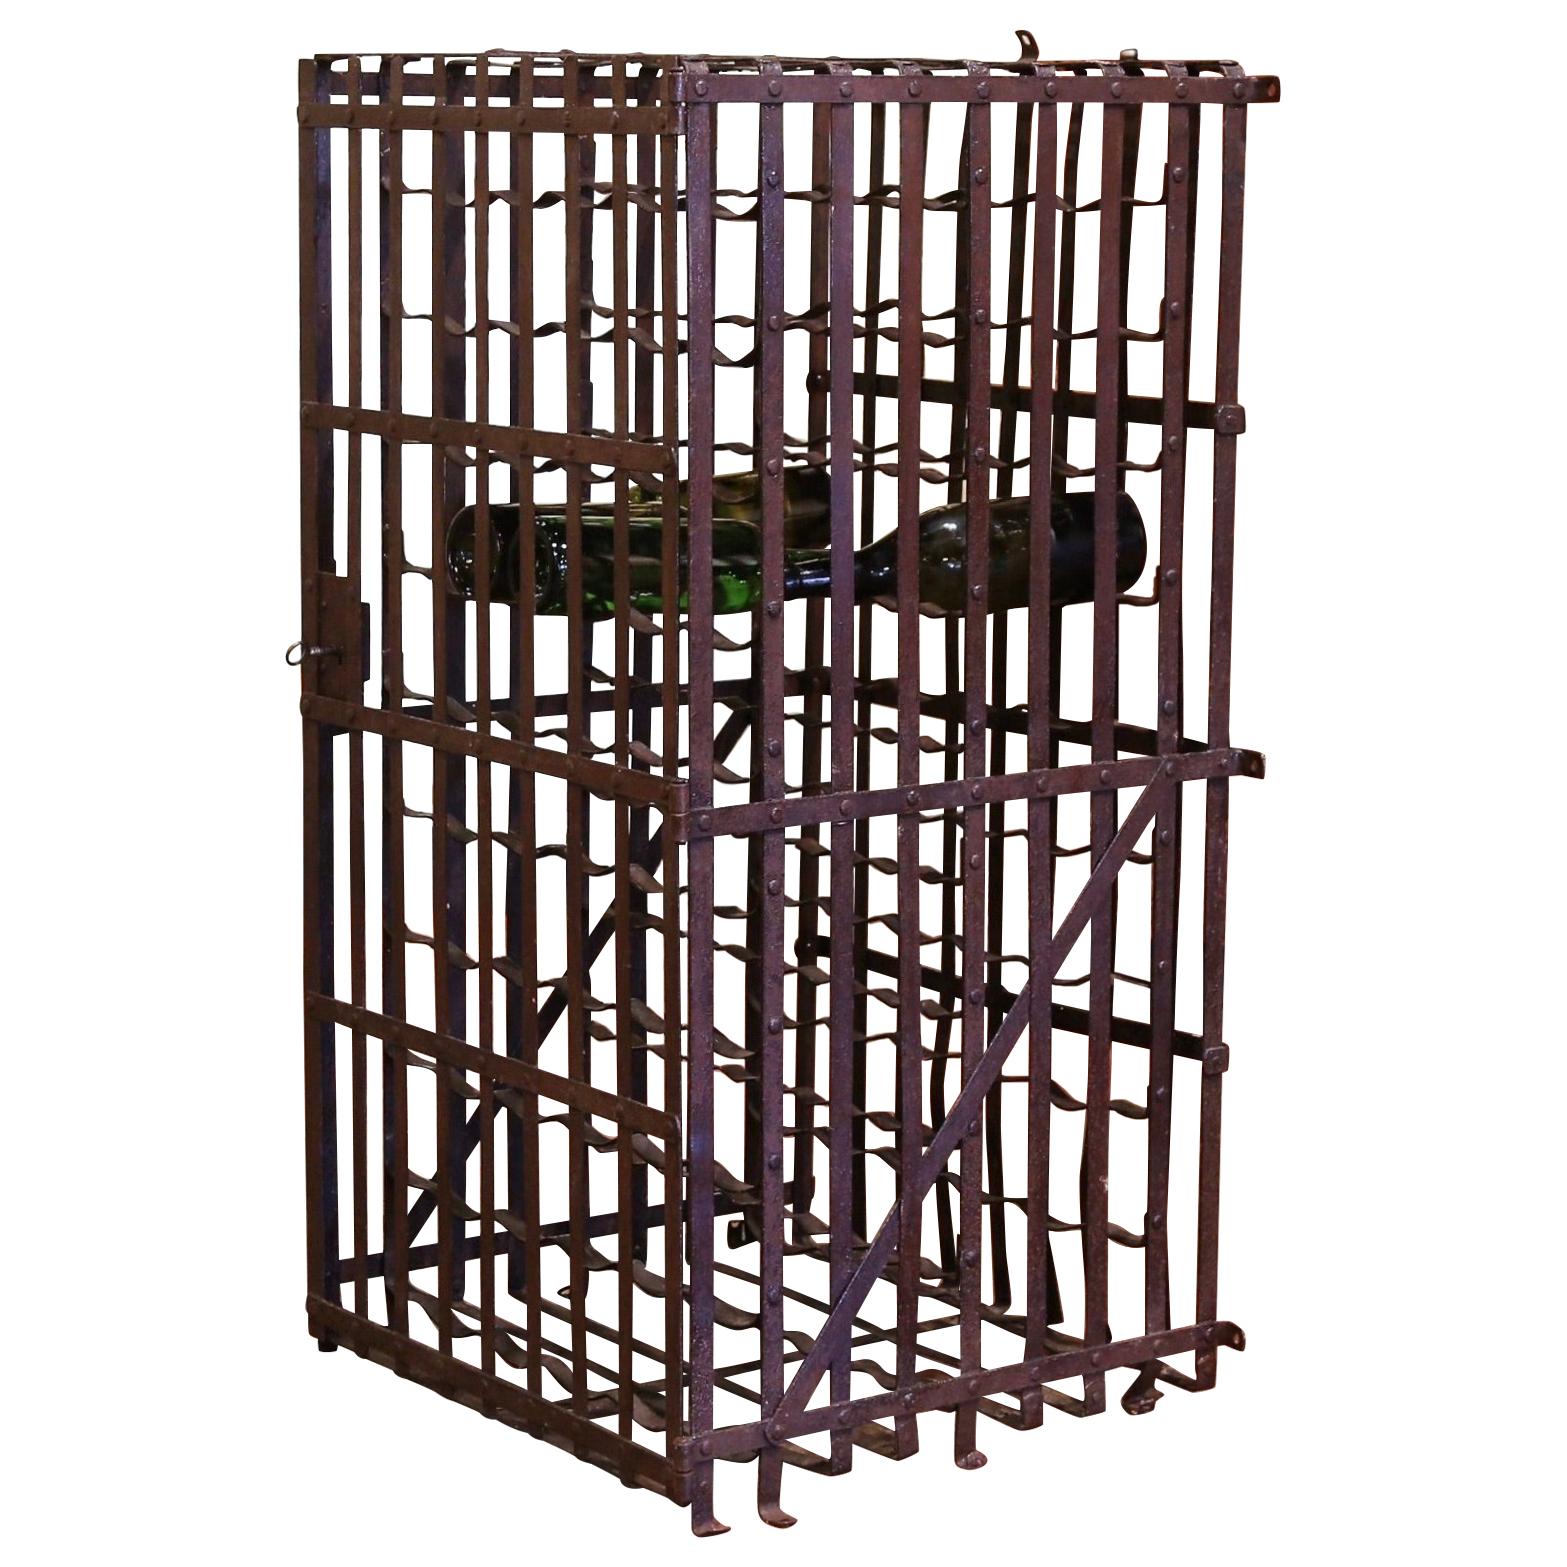 19th Century French Iron Hundred-Bottle Wine Rack Cabinet from Burgundy